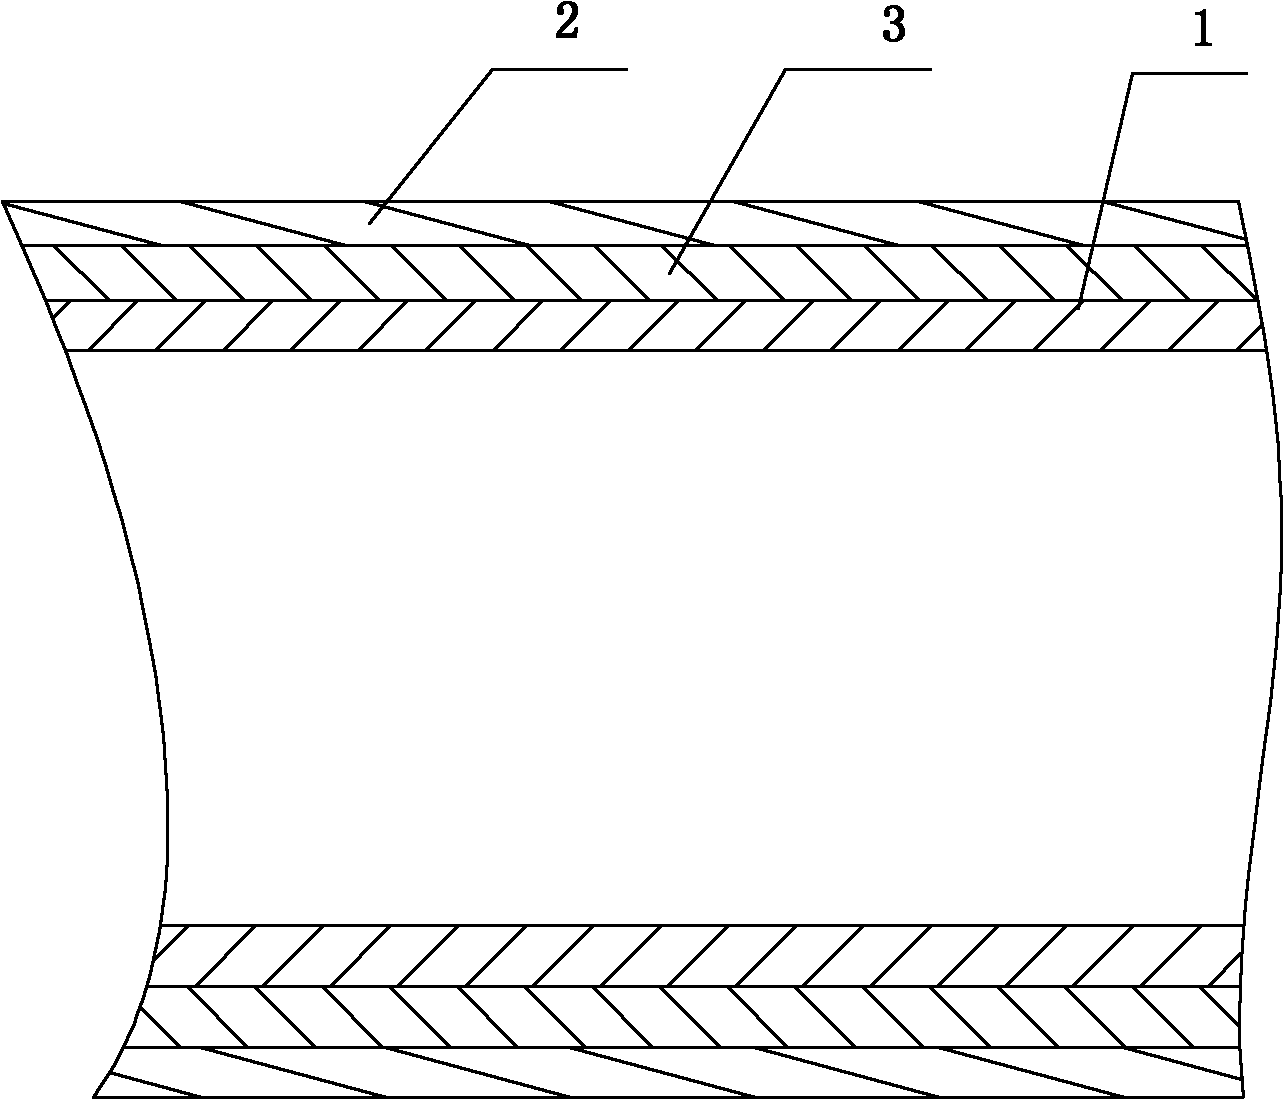 Fiber reinforced pipe for mine and production method thereof